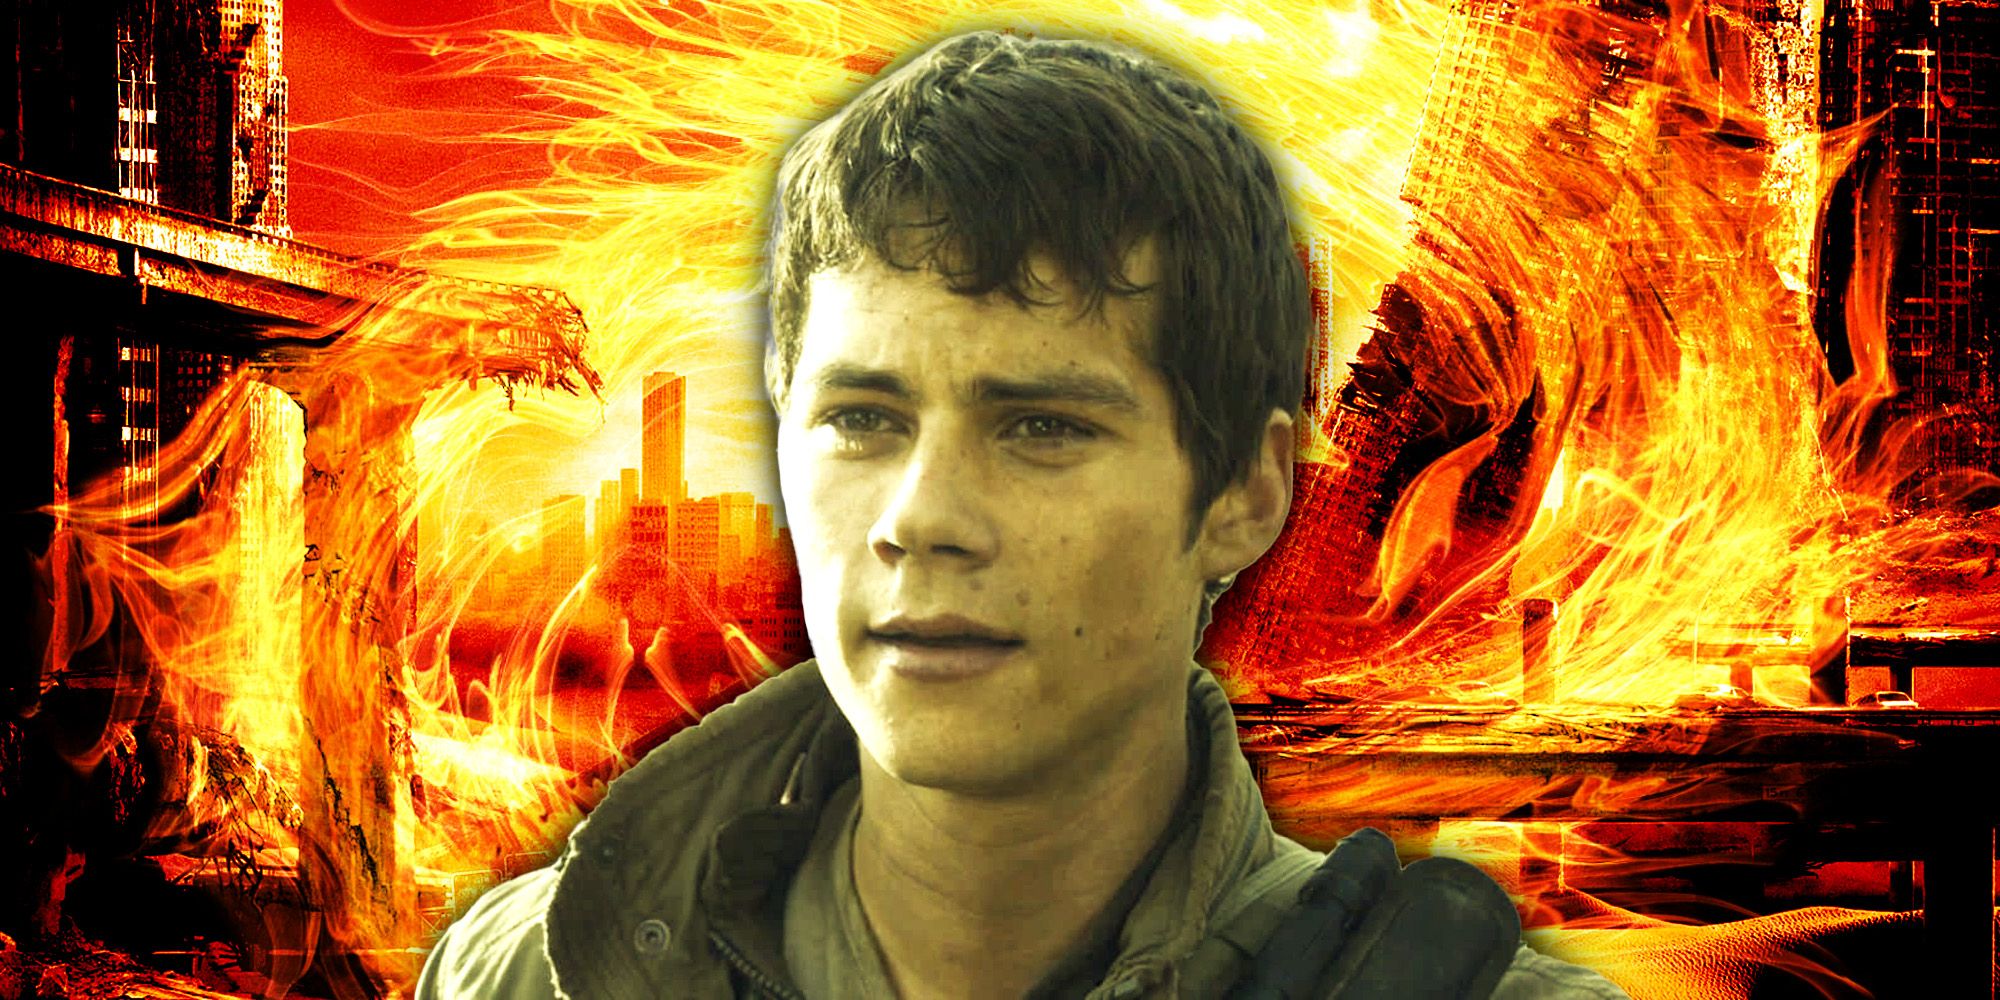 Dylan O'Brien as Thomas in Maze Runner: The Scorch Trials on a fiery background